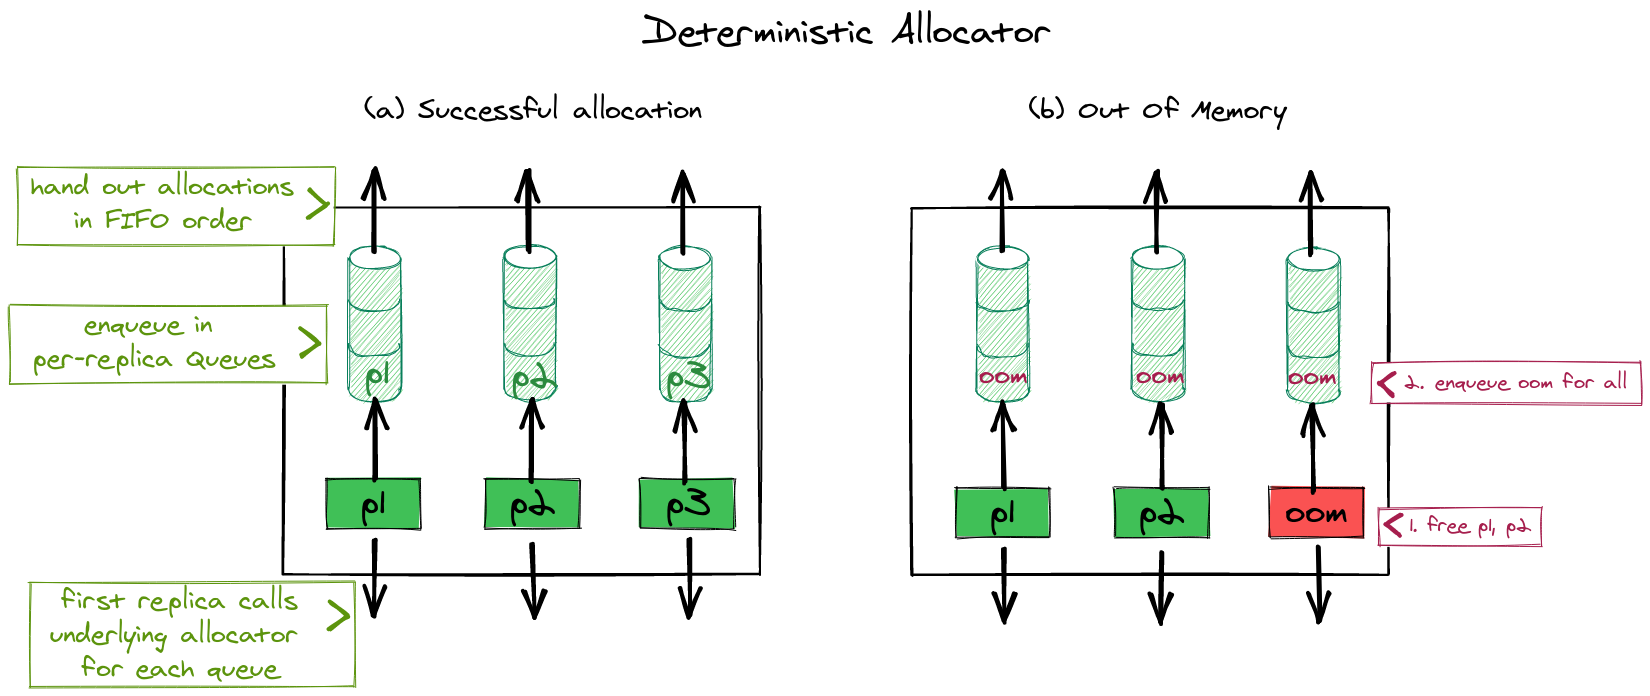 Schematic overview of the deterministic memory allocator